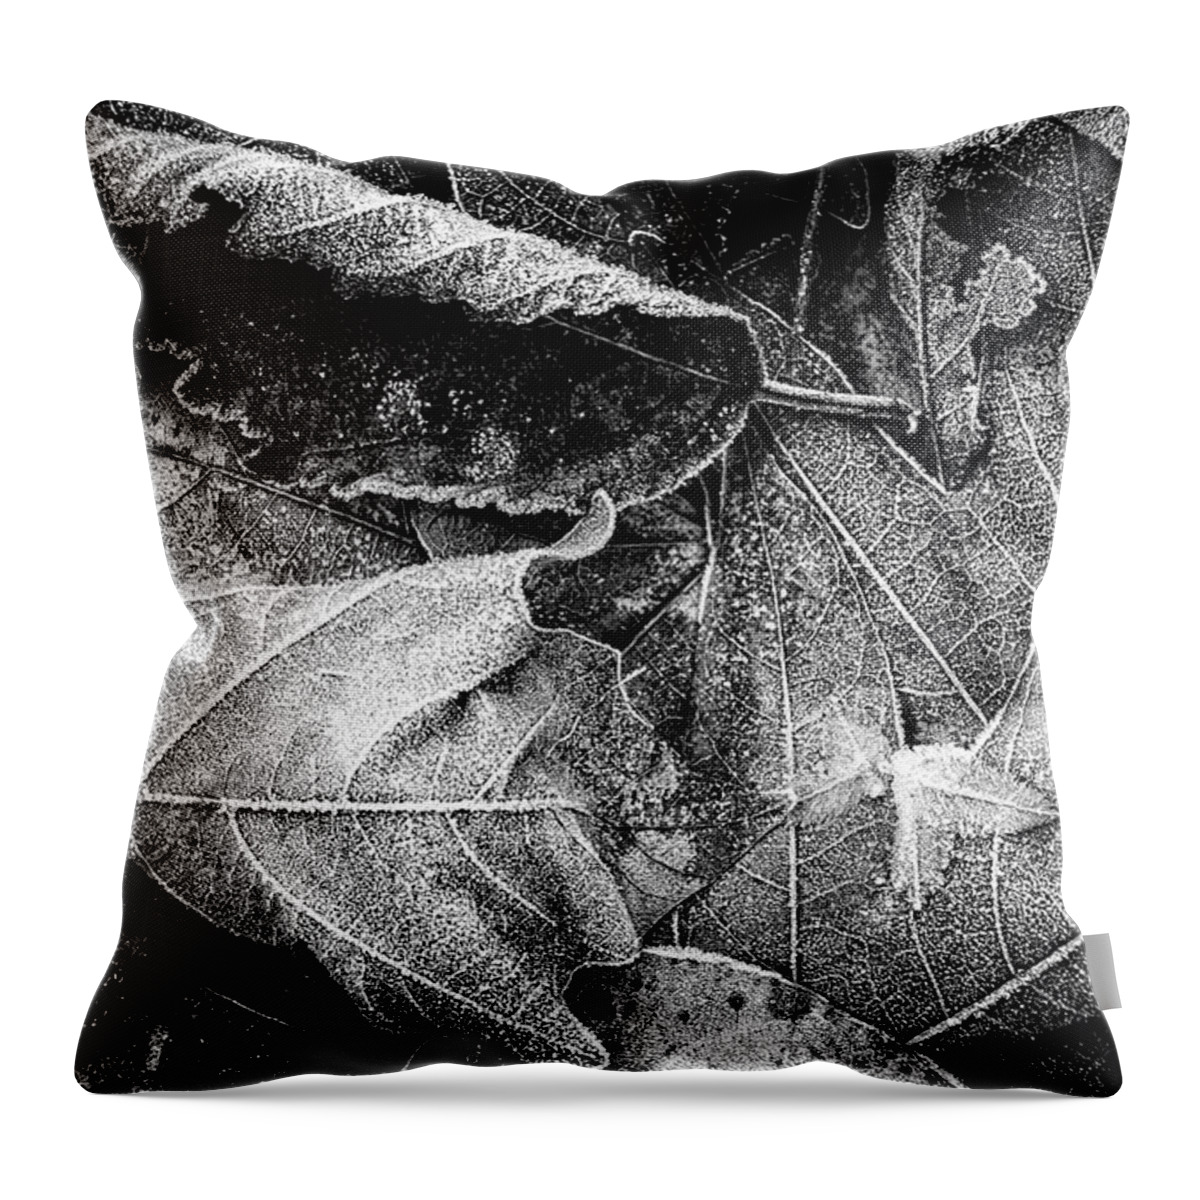 Frost Throw Pillow featuring the photograph Frost on Fallen Leaves bw by Belinda Greb